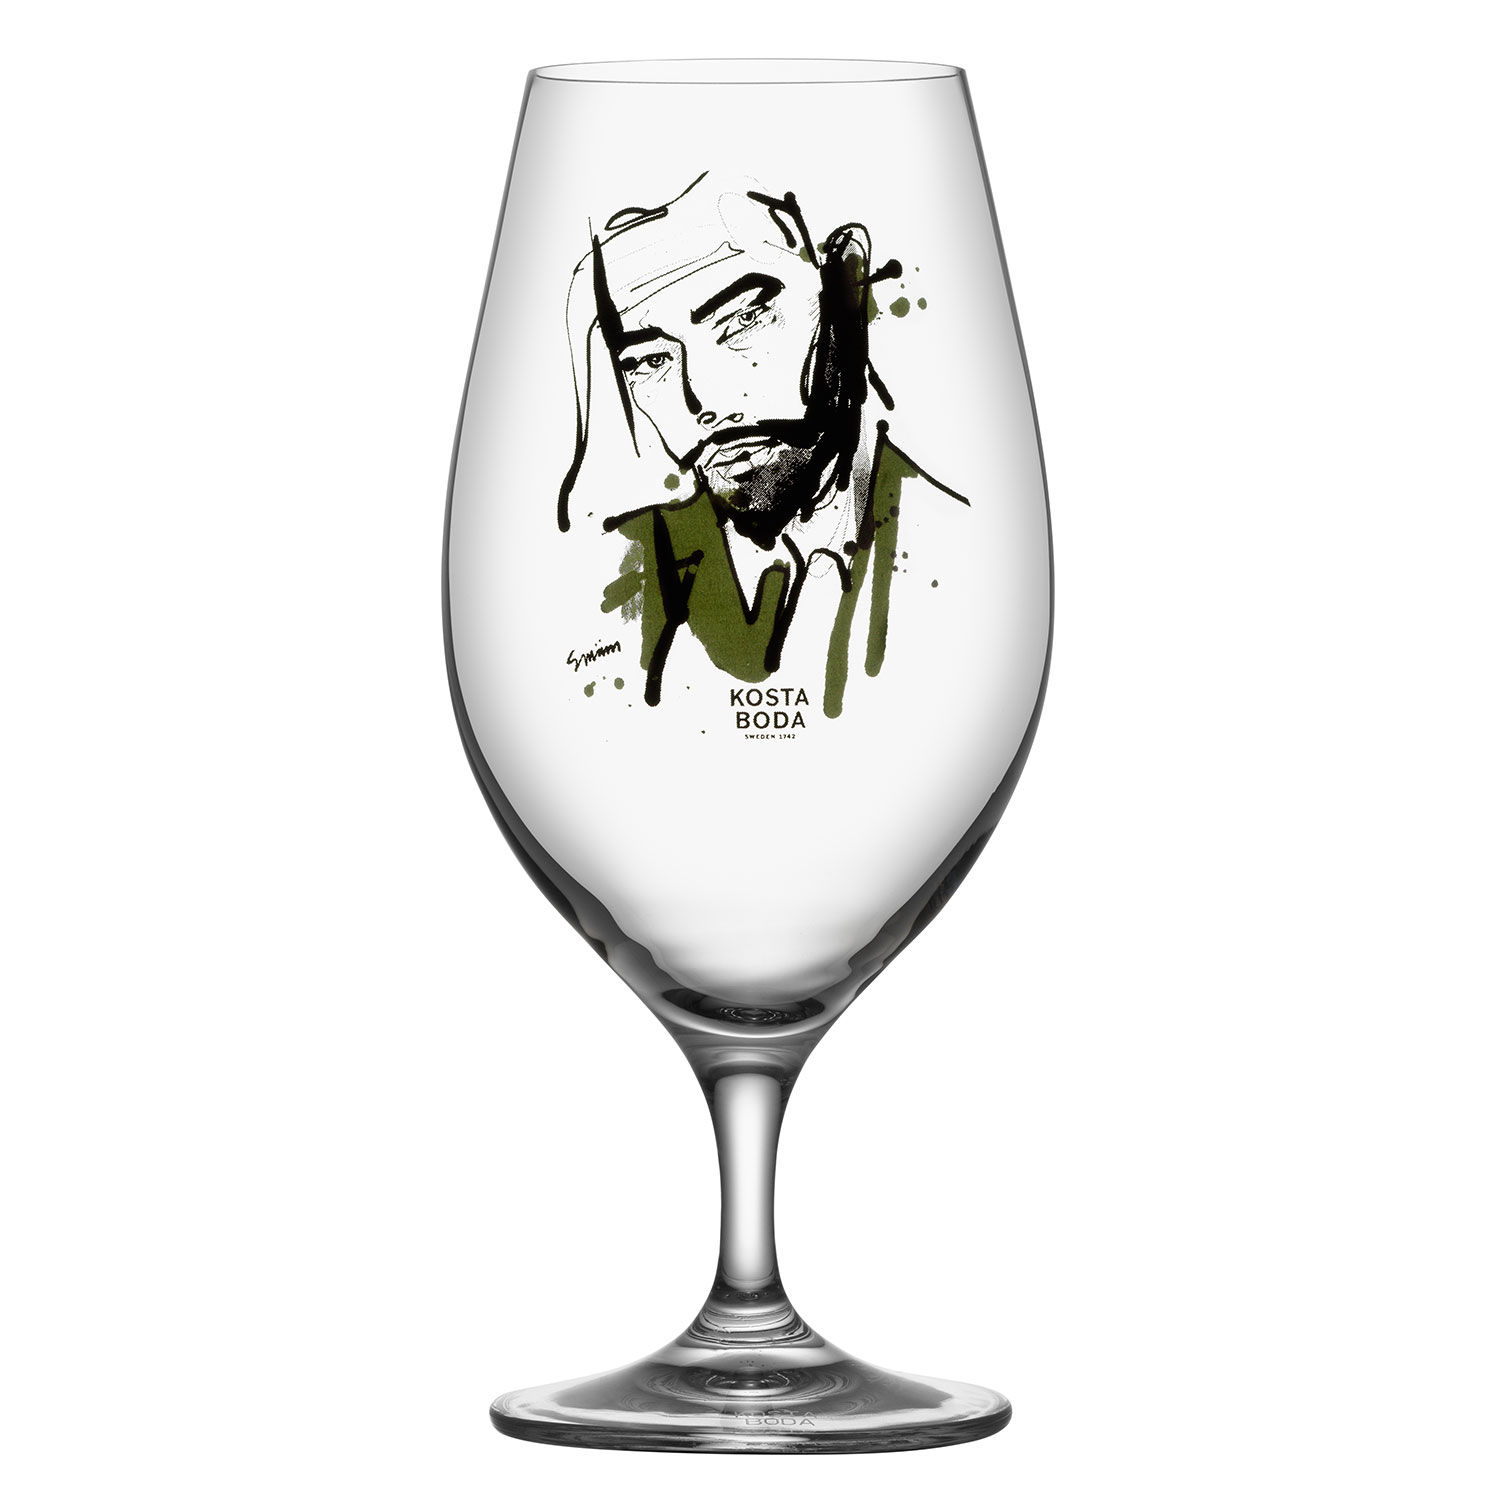 All About You Beer Glass Set 2, Him - Boda RoyalDesign